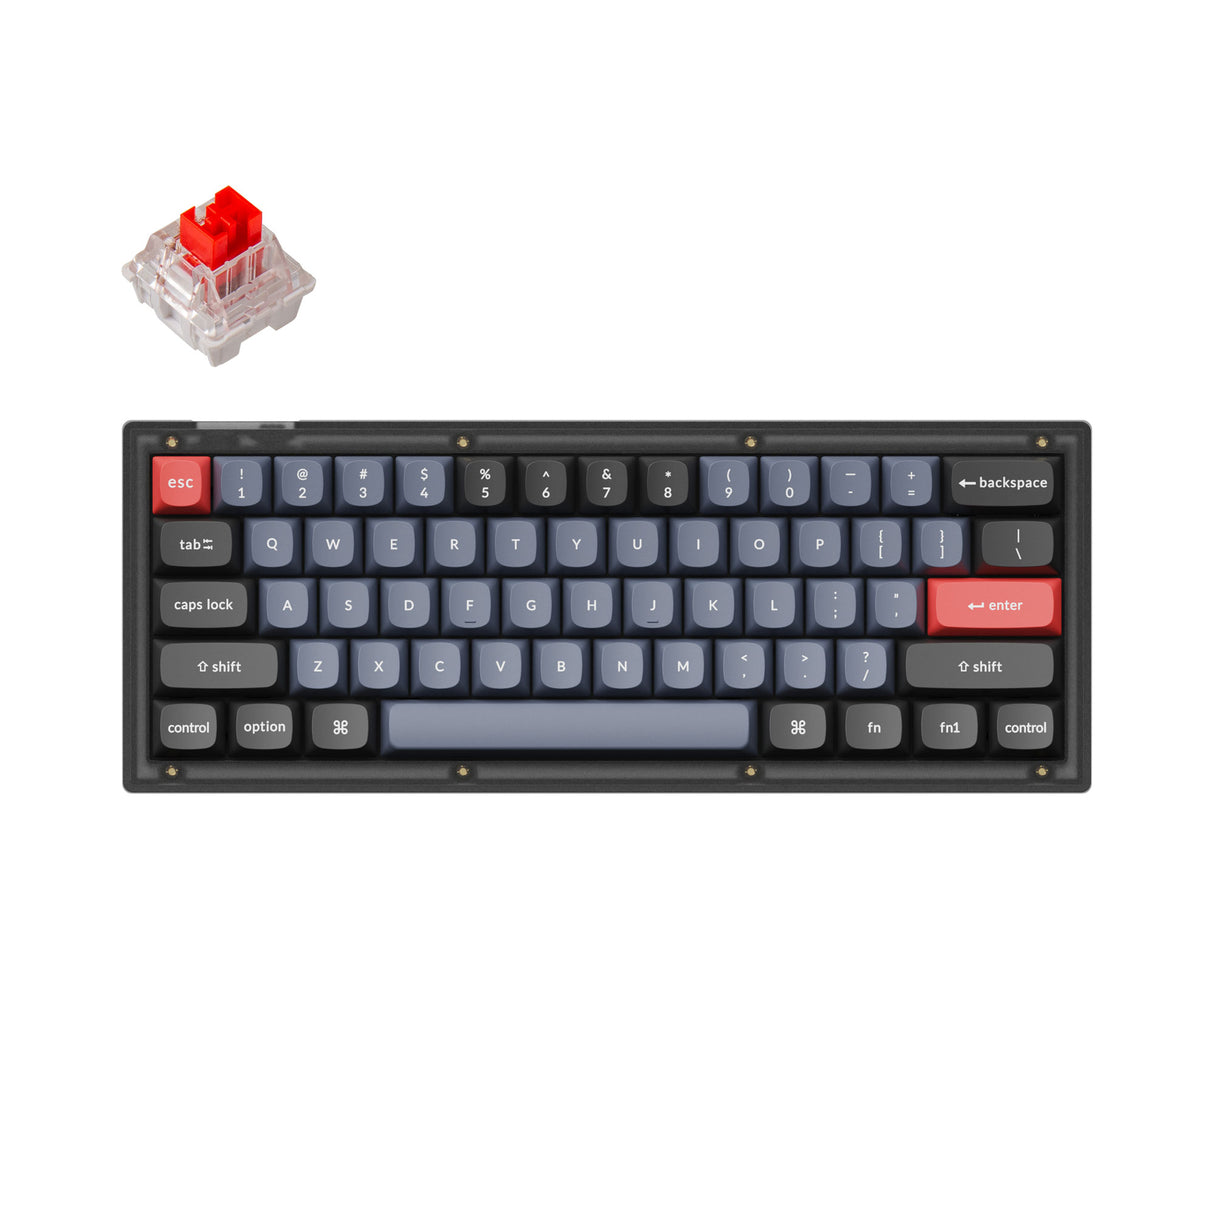 Keychron V4 QMK VIA custom mechanical keyboard 60 percent layout frosted black for Mac Windows iOS RGB backlight with hot swappable Keychron K Pro switch red